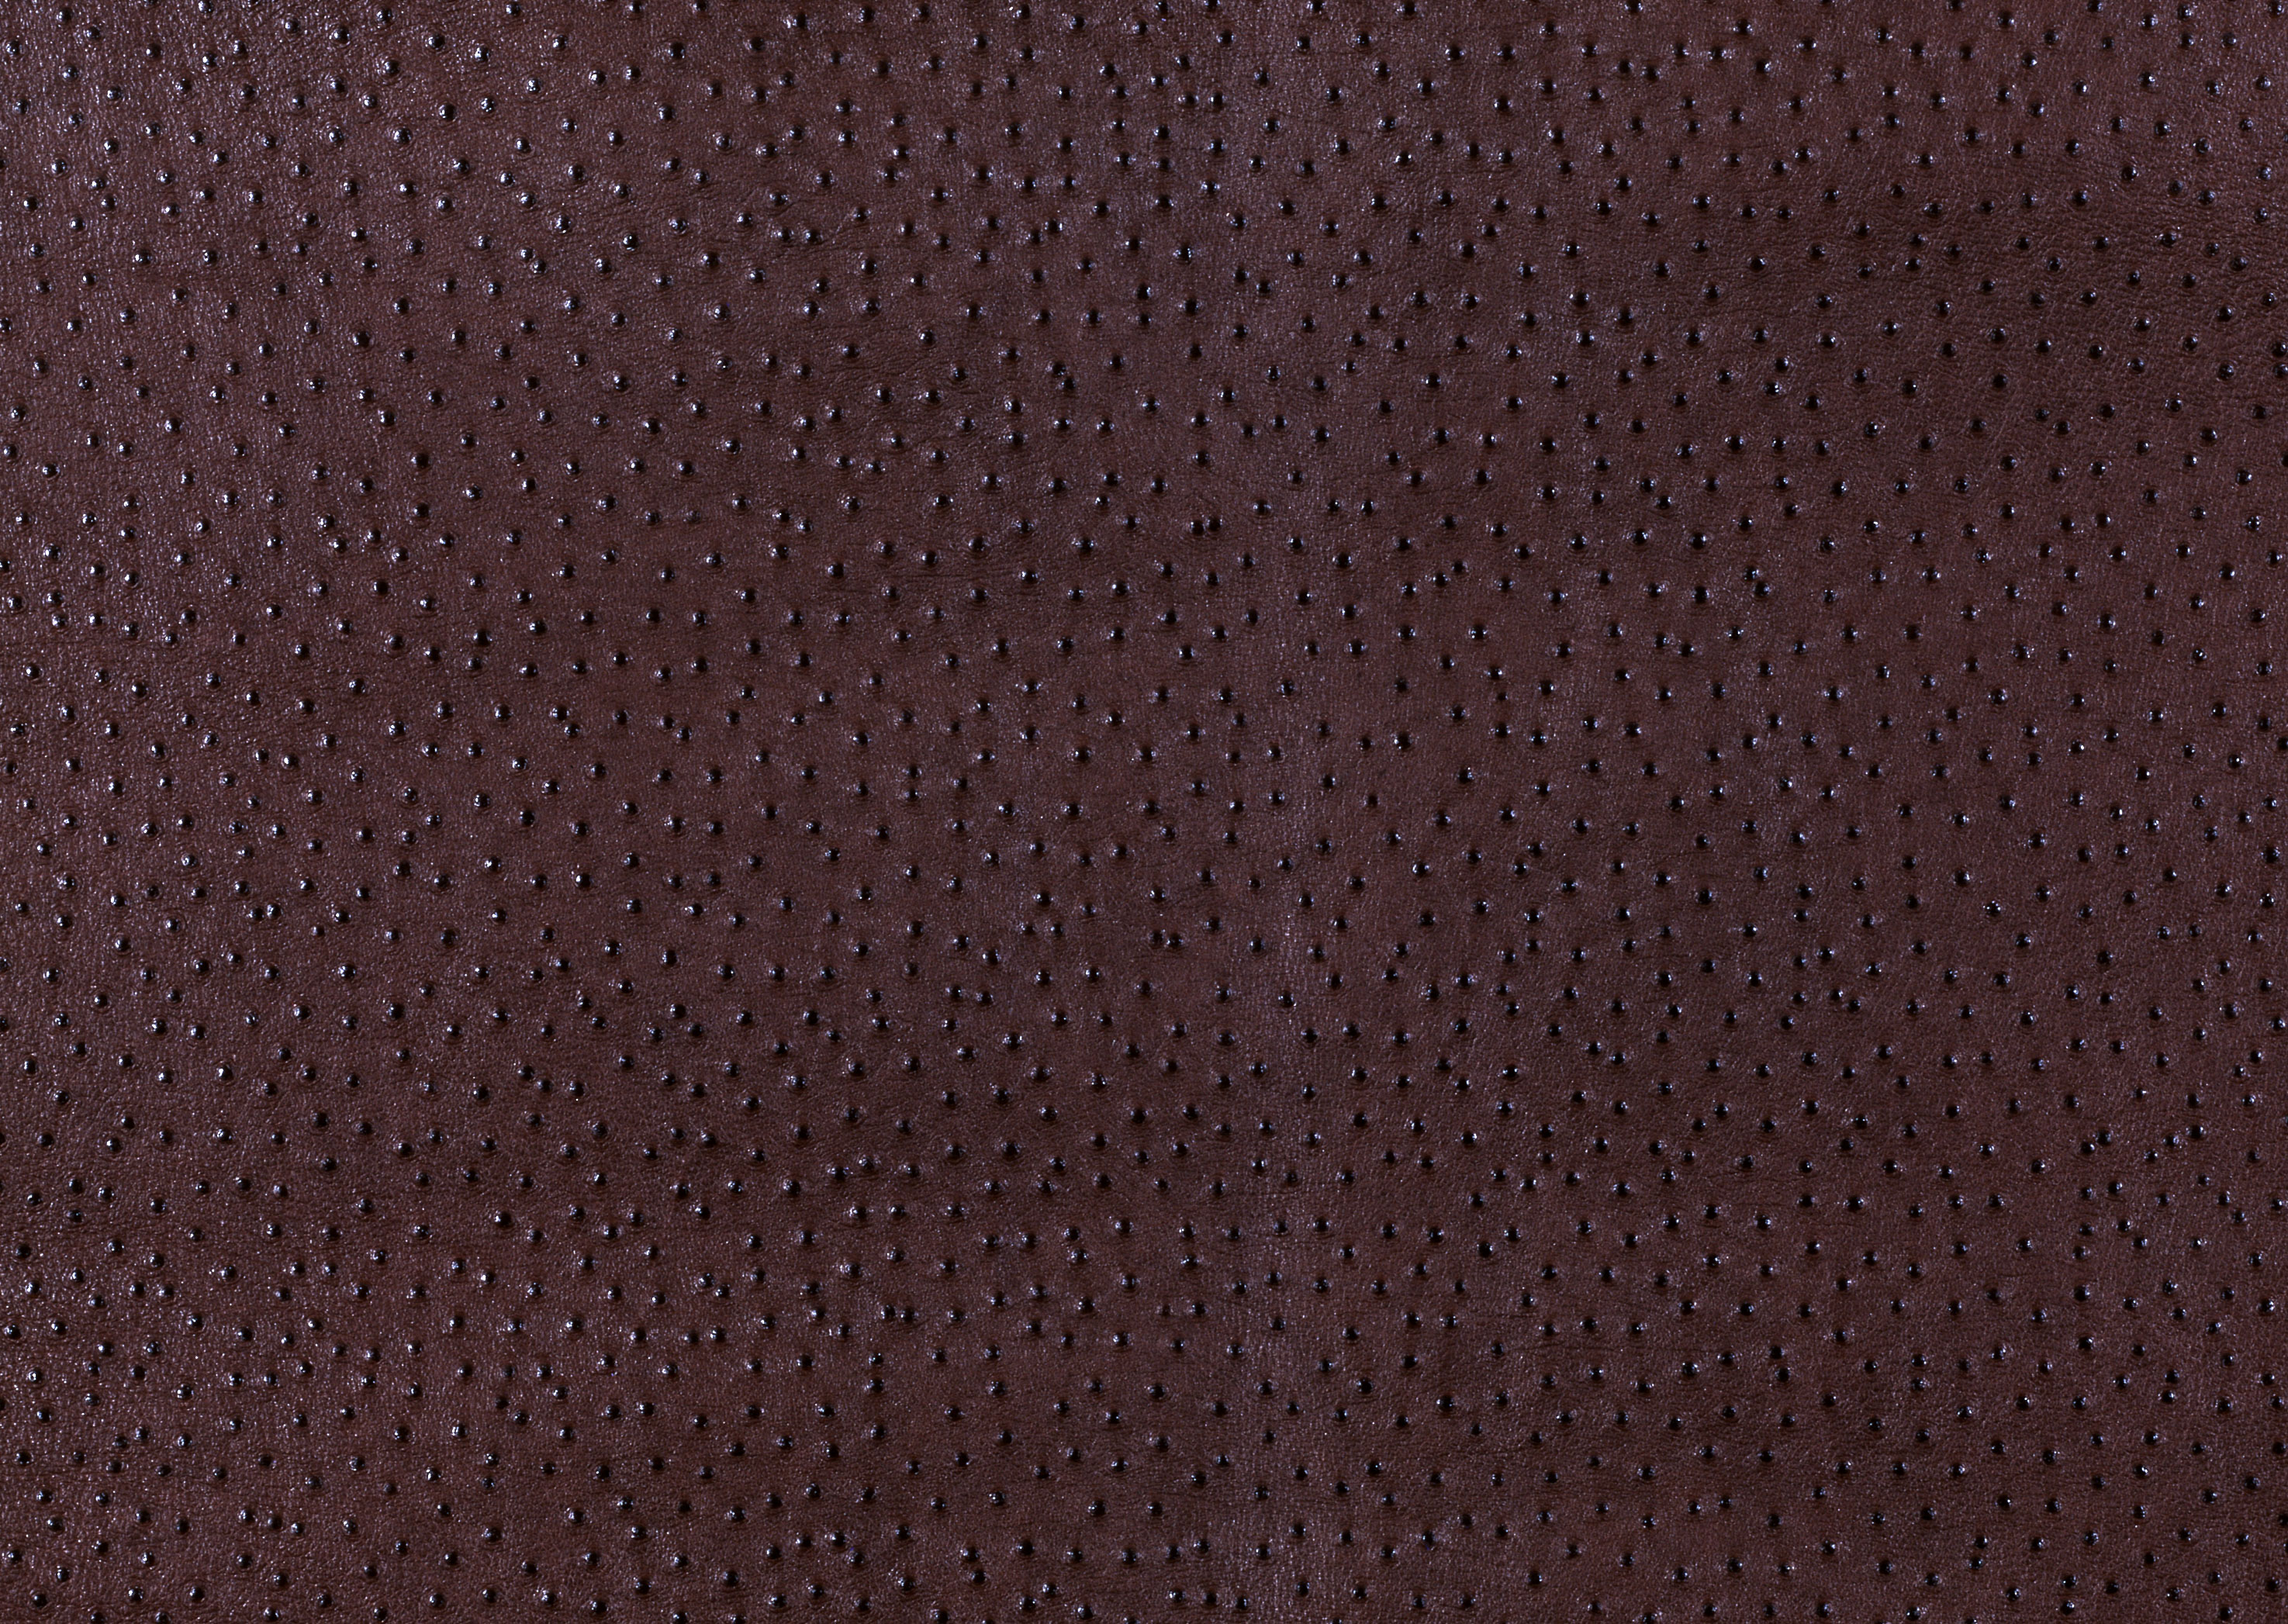 Leather big textures background image, free picture leather download